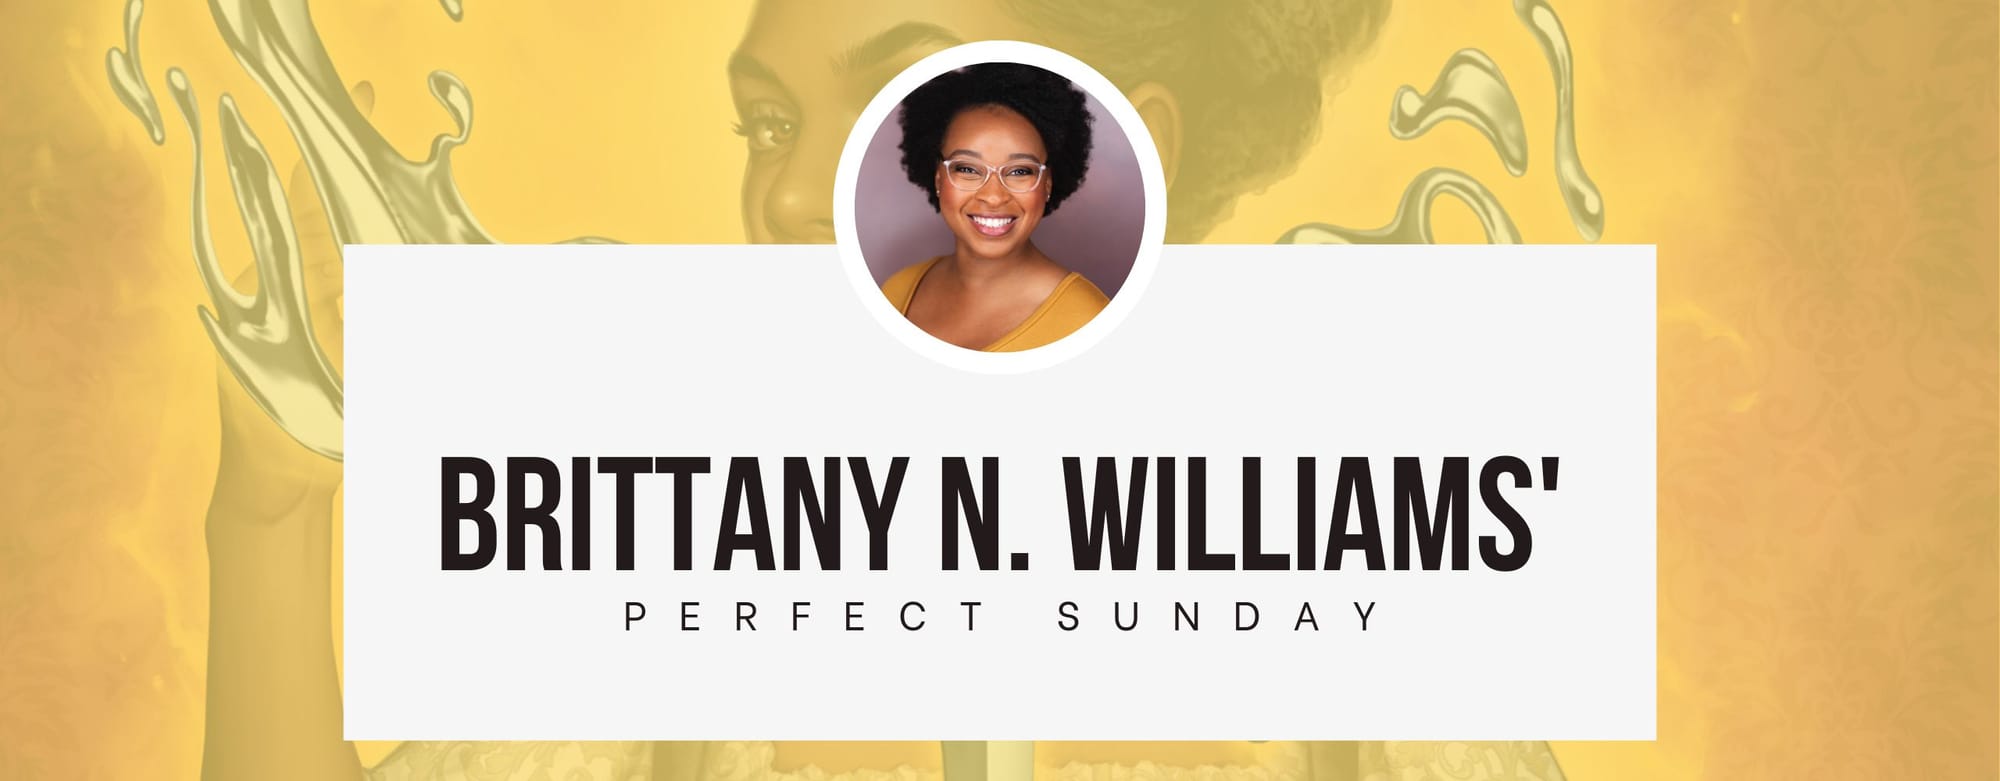 A perfect Sunday with... Brittany N. Williams